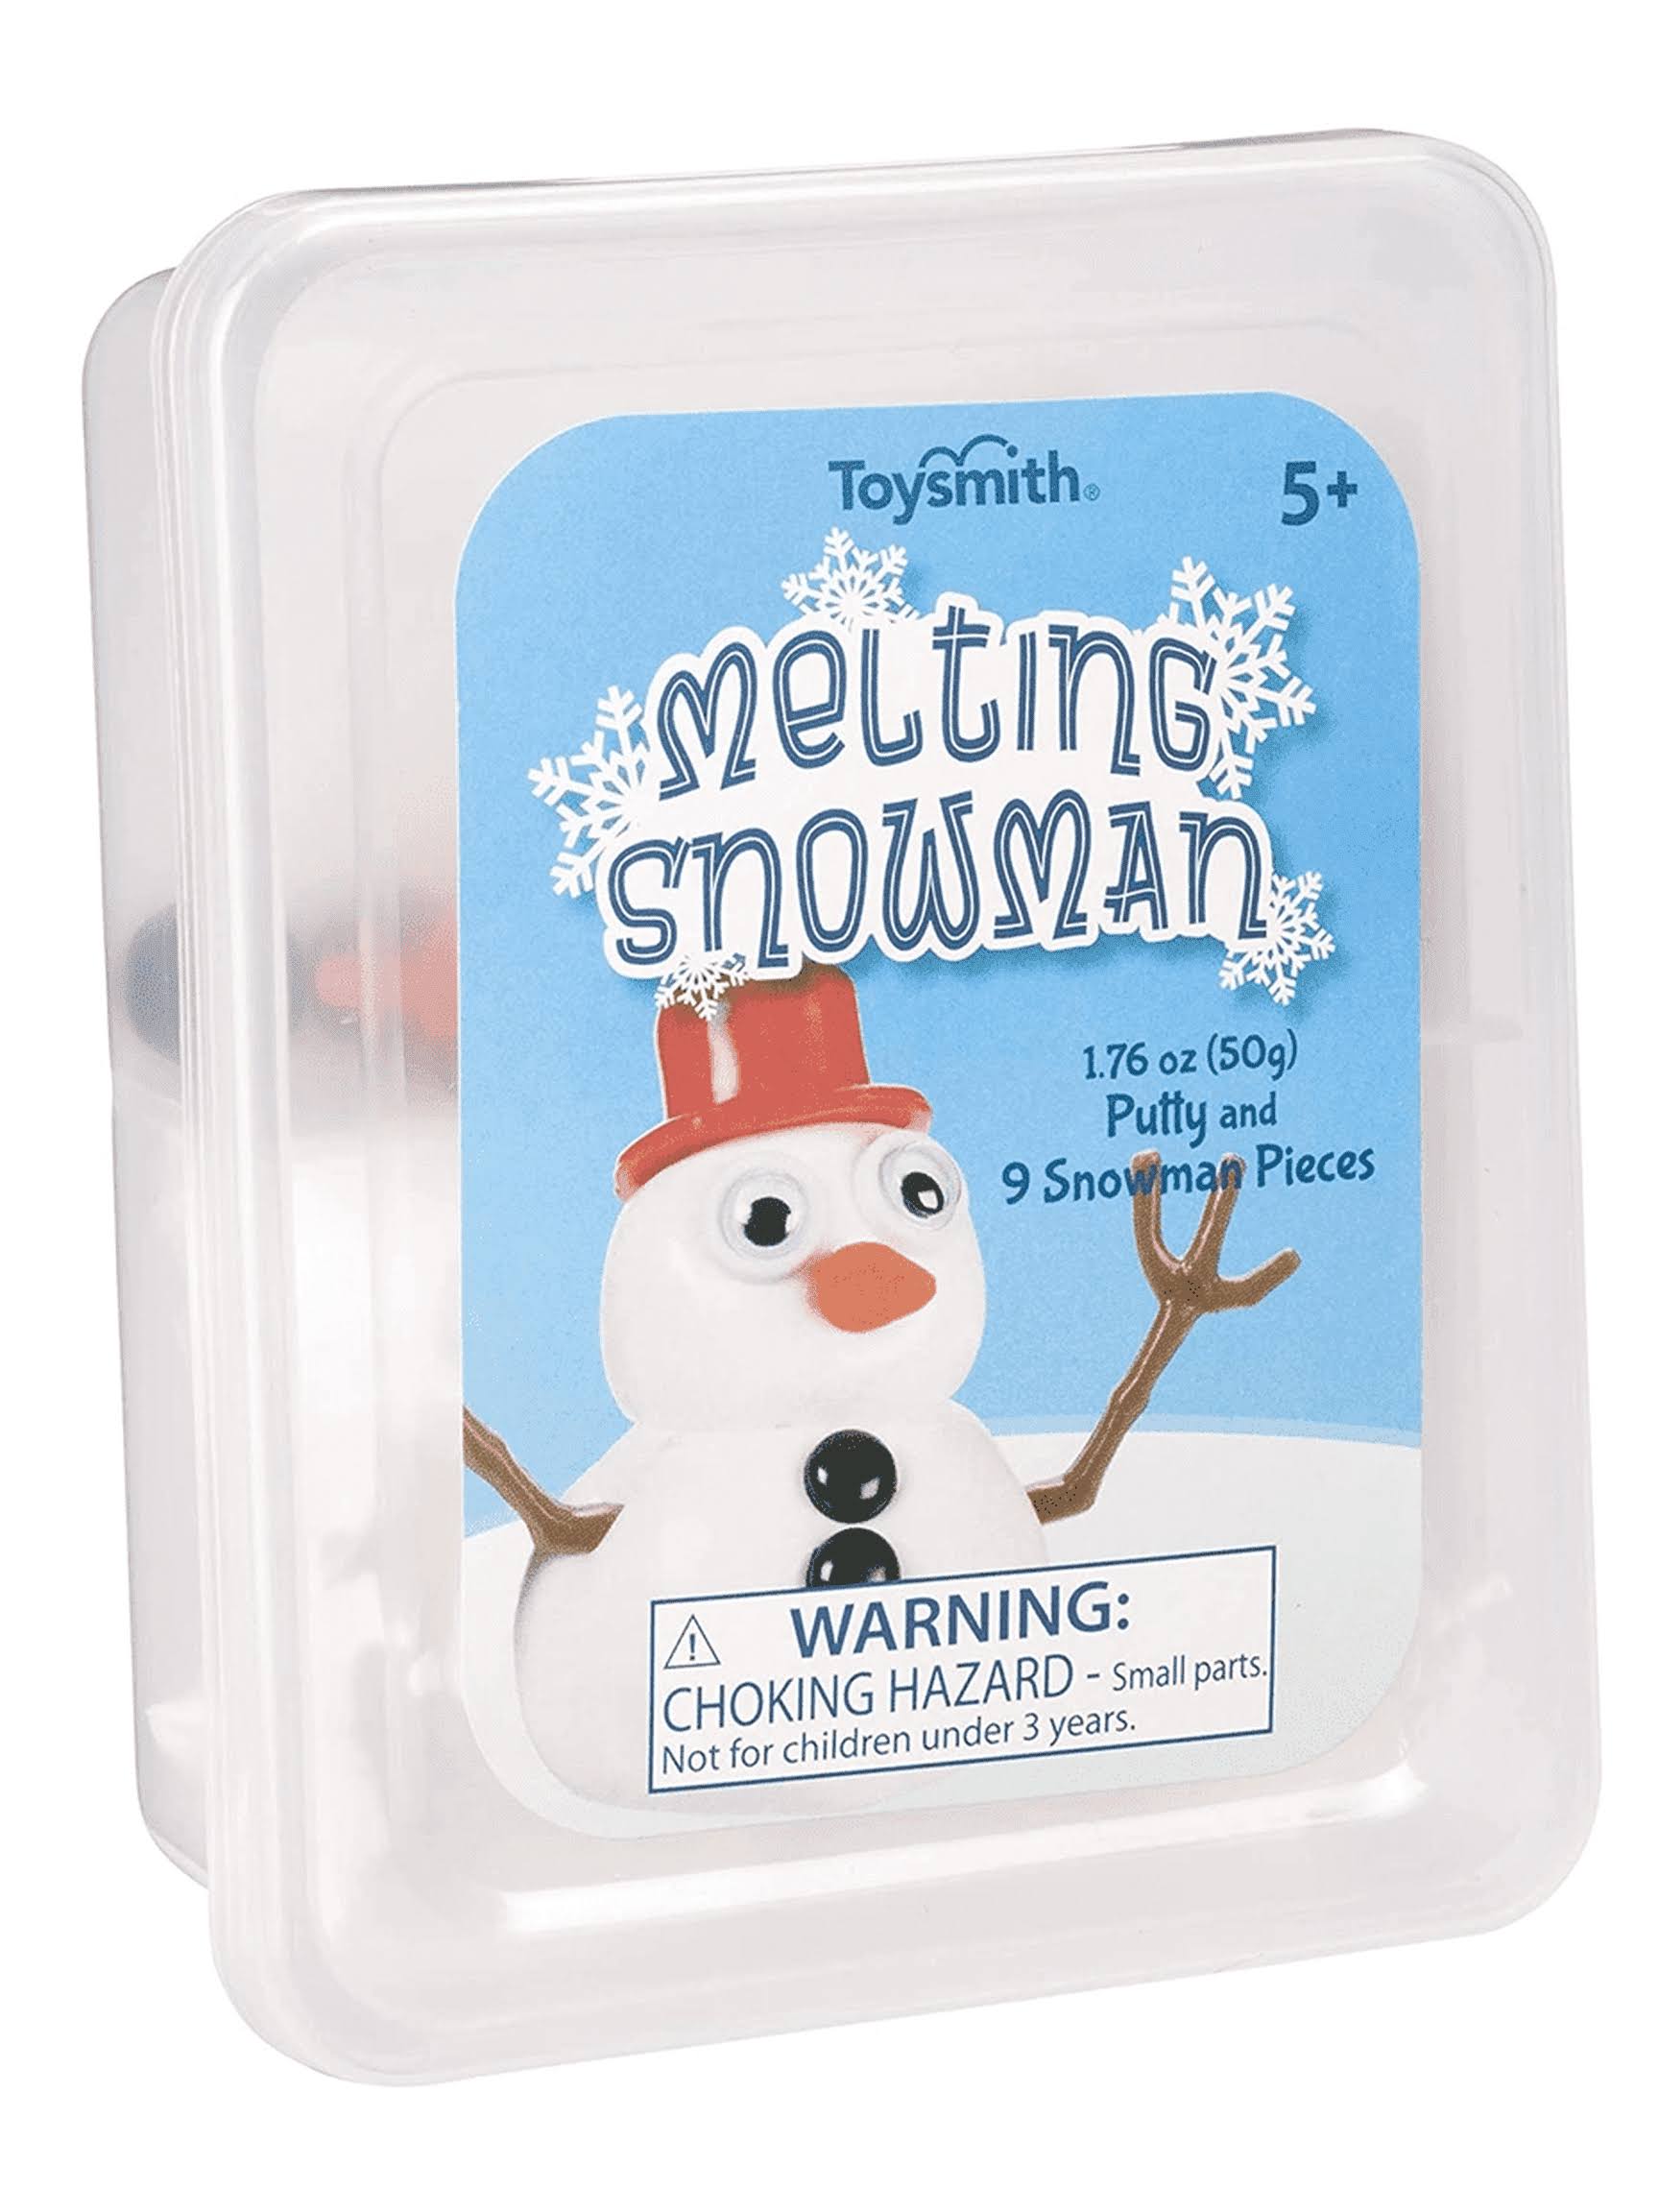 Play Visions 4602 Floof Modeling Clay-Reuseable Indoor Snow-Endless  Creations with 3 Polar Baby Molds and Pawprint Roller